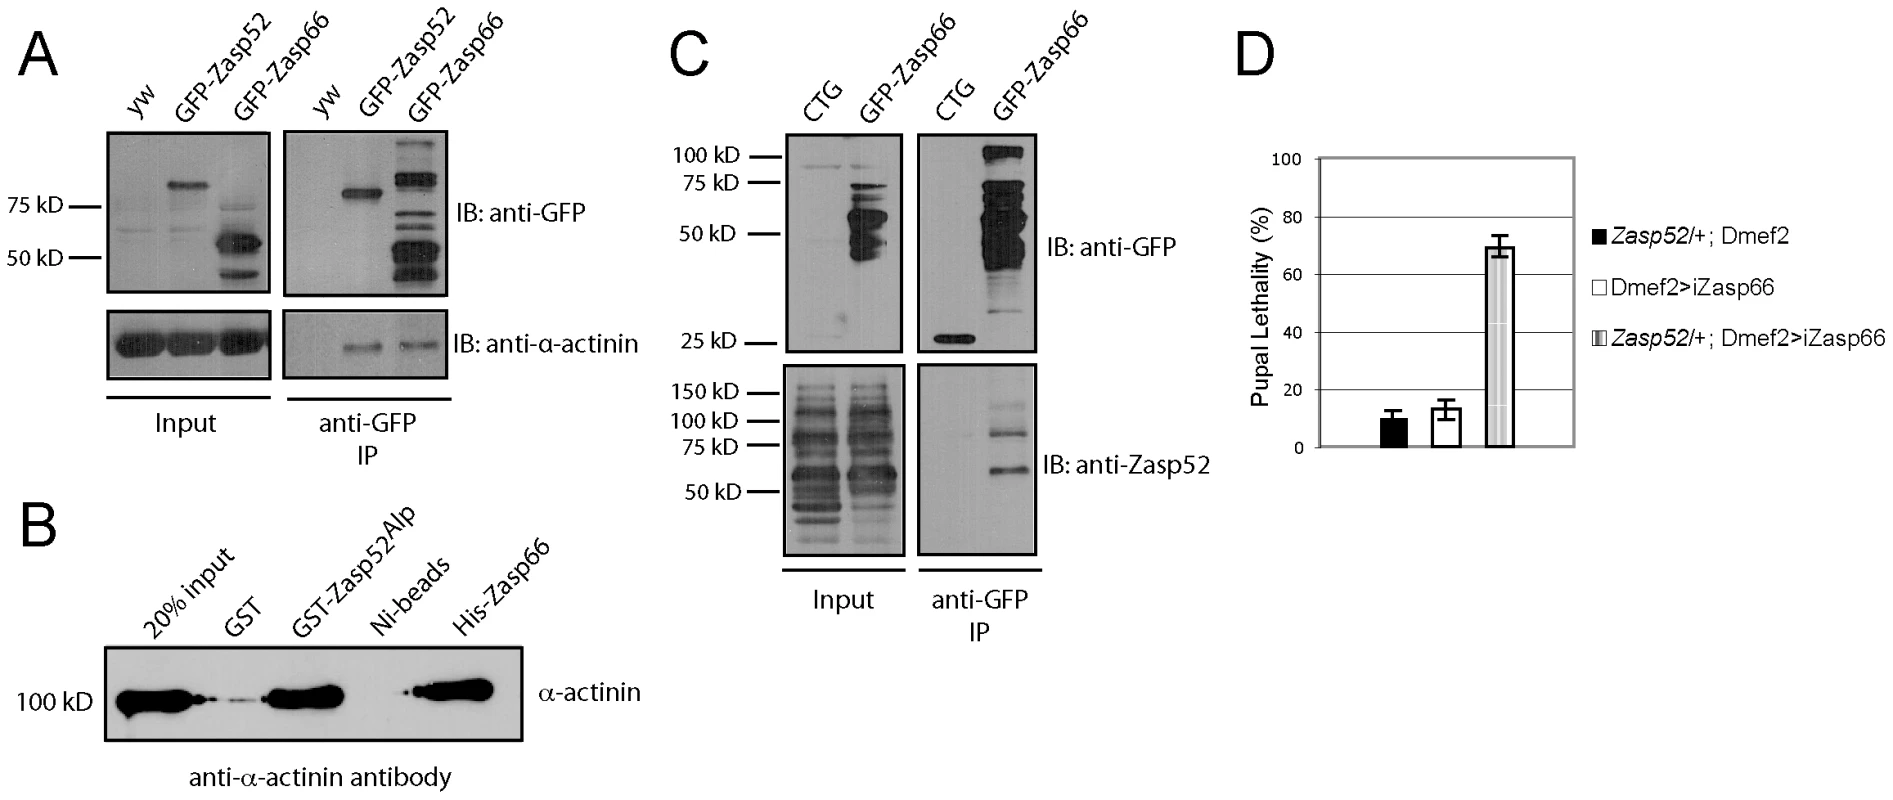 Zasp52 and Zasp66 both bind α-actinin and genetically interact.